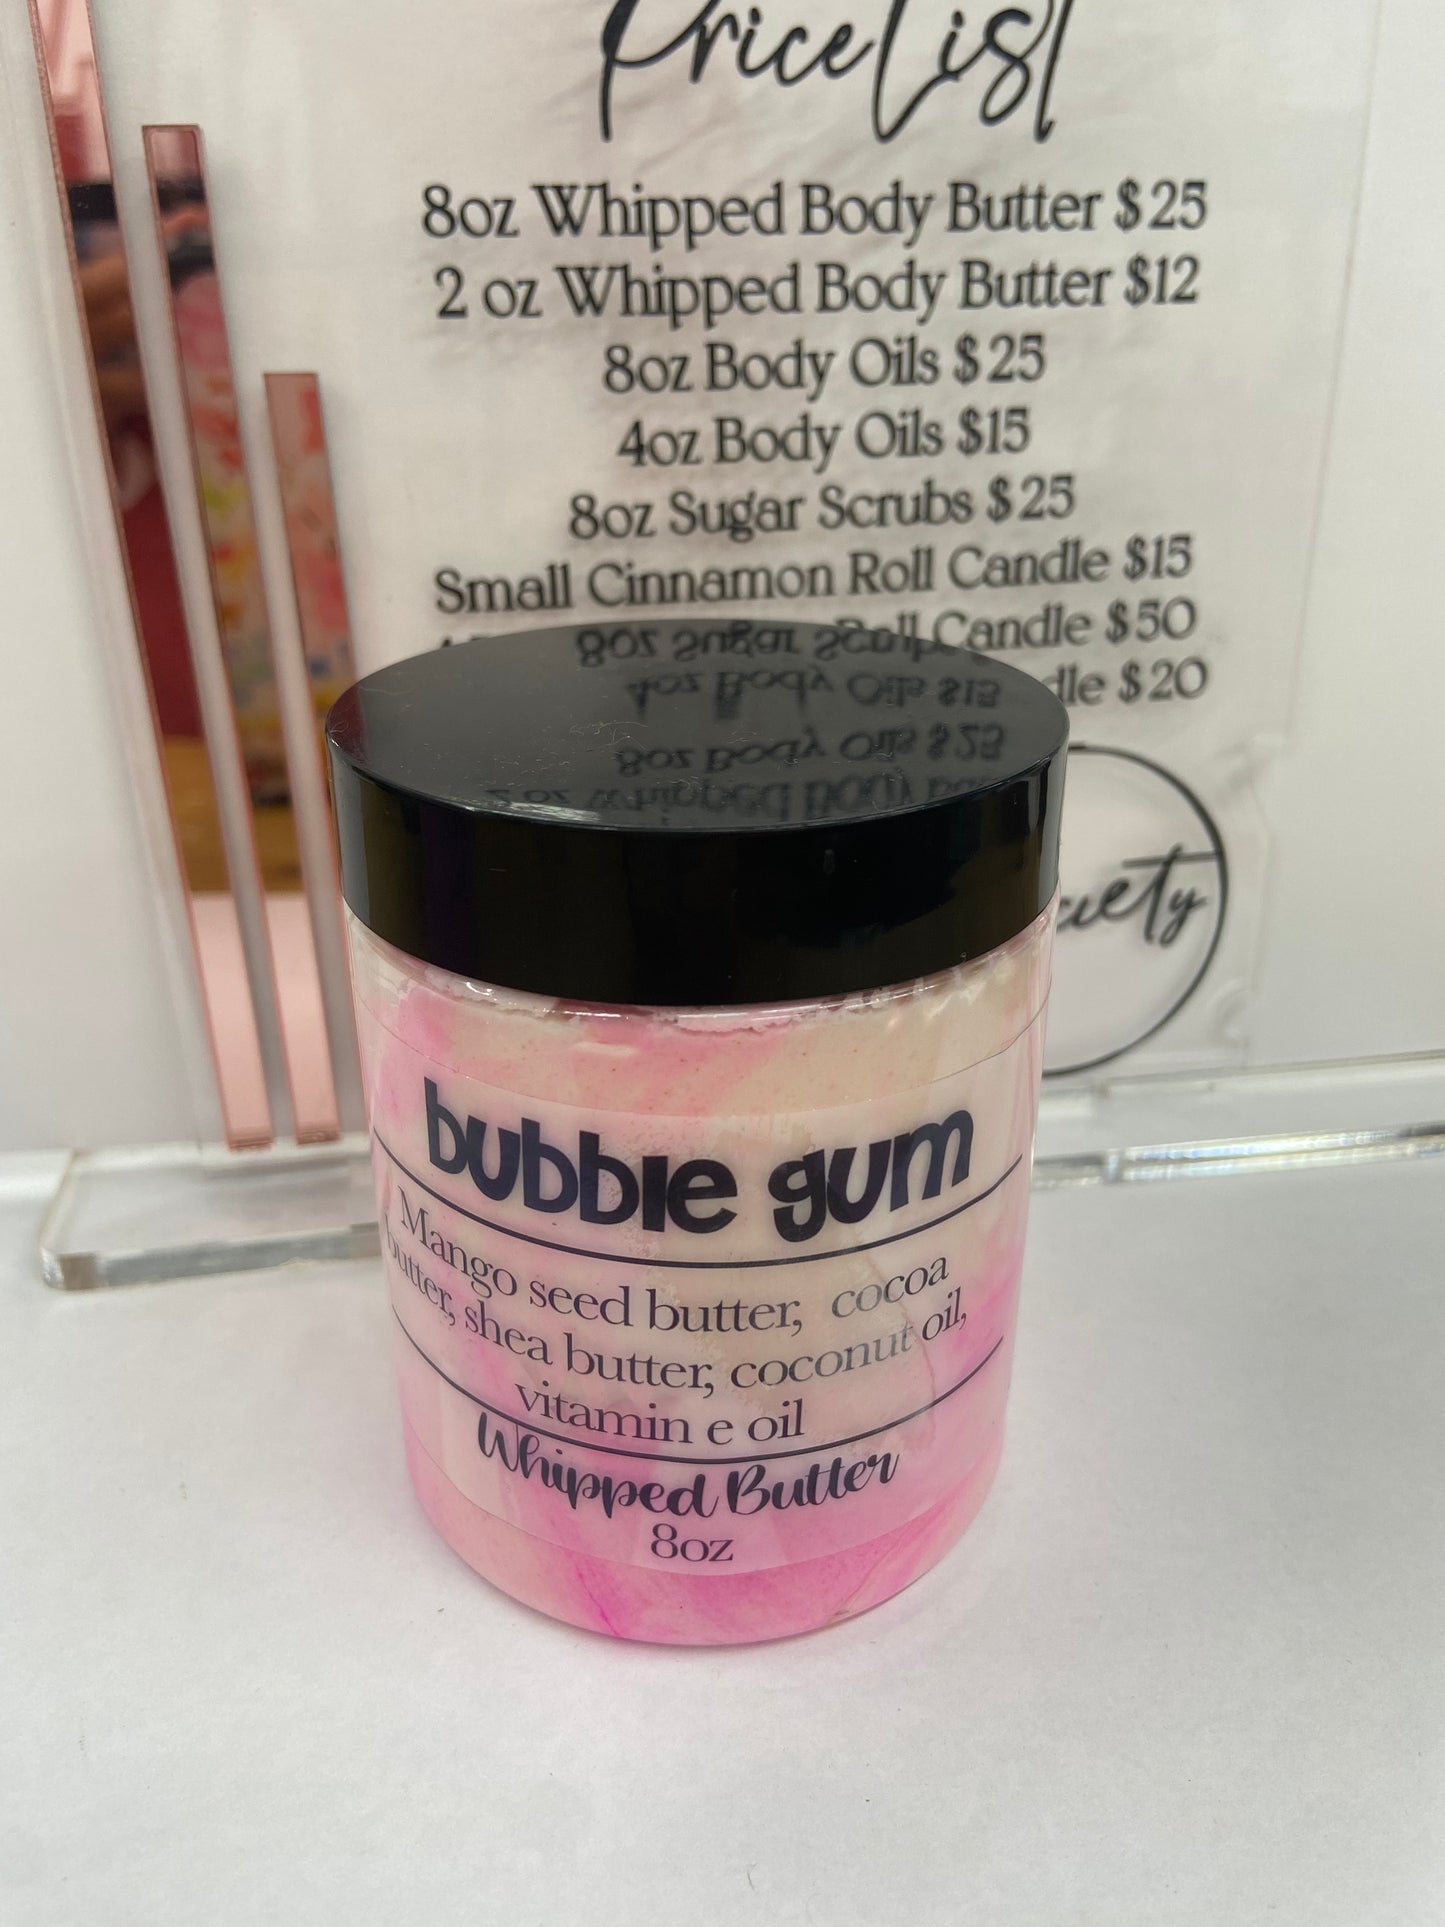 “Bubble Gum” Whipped Body Butter